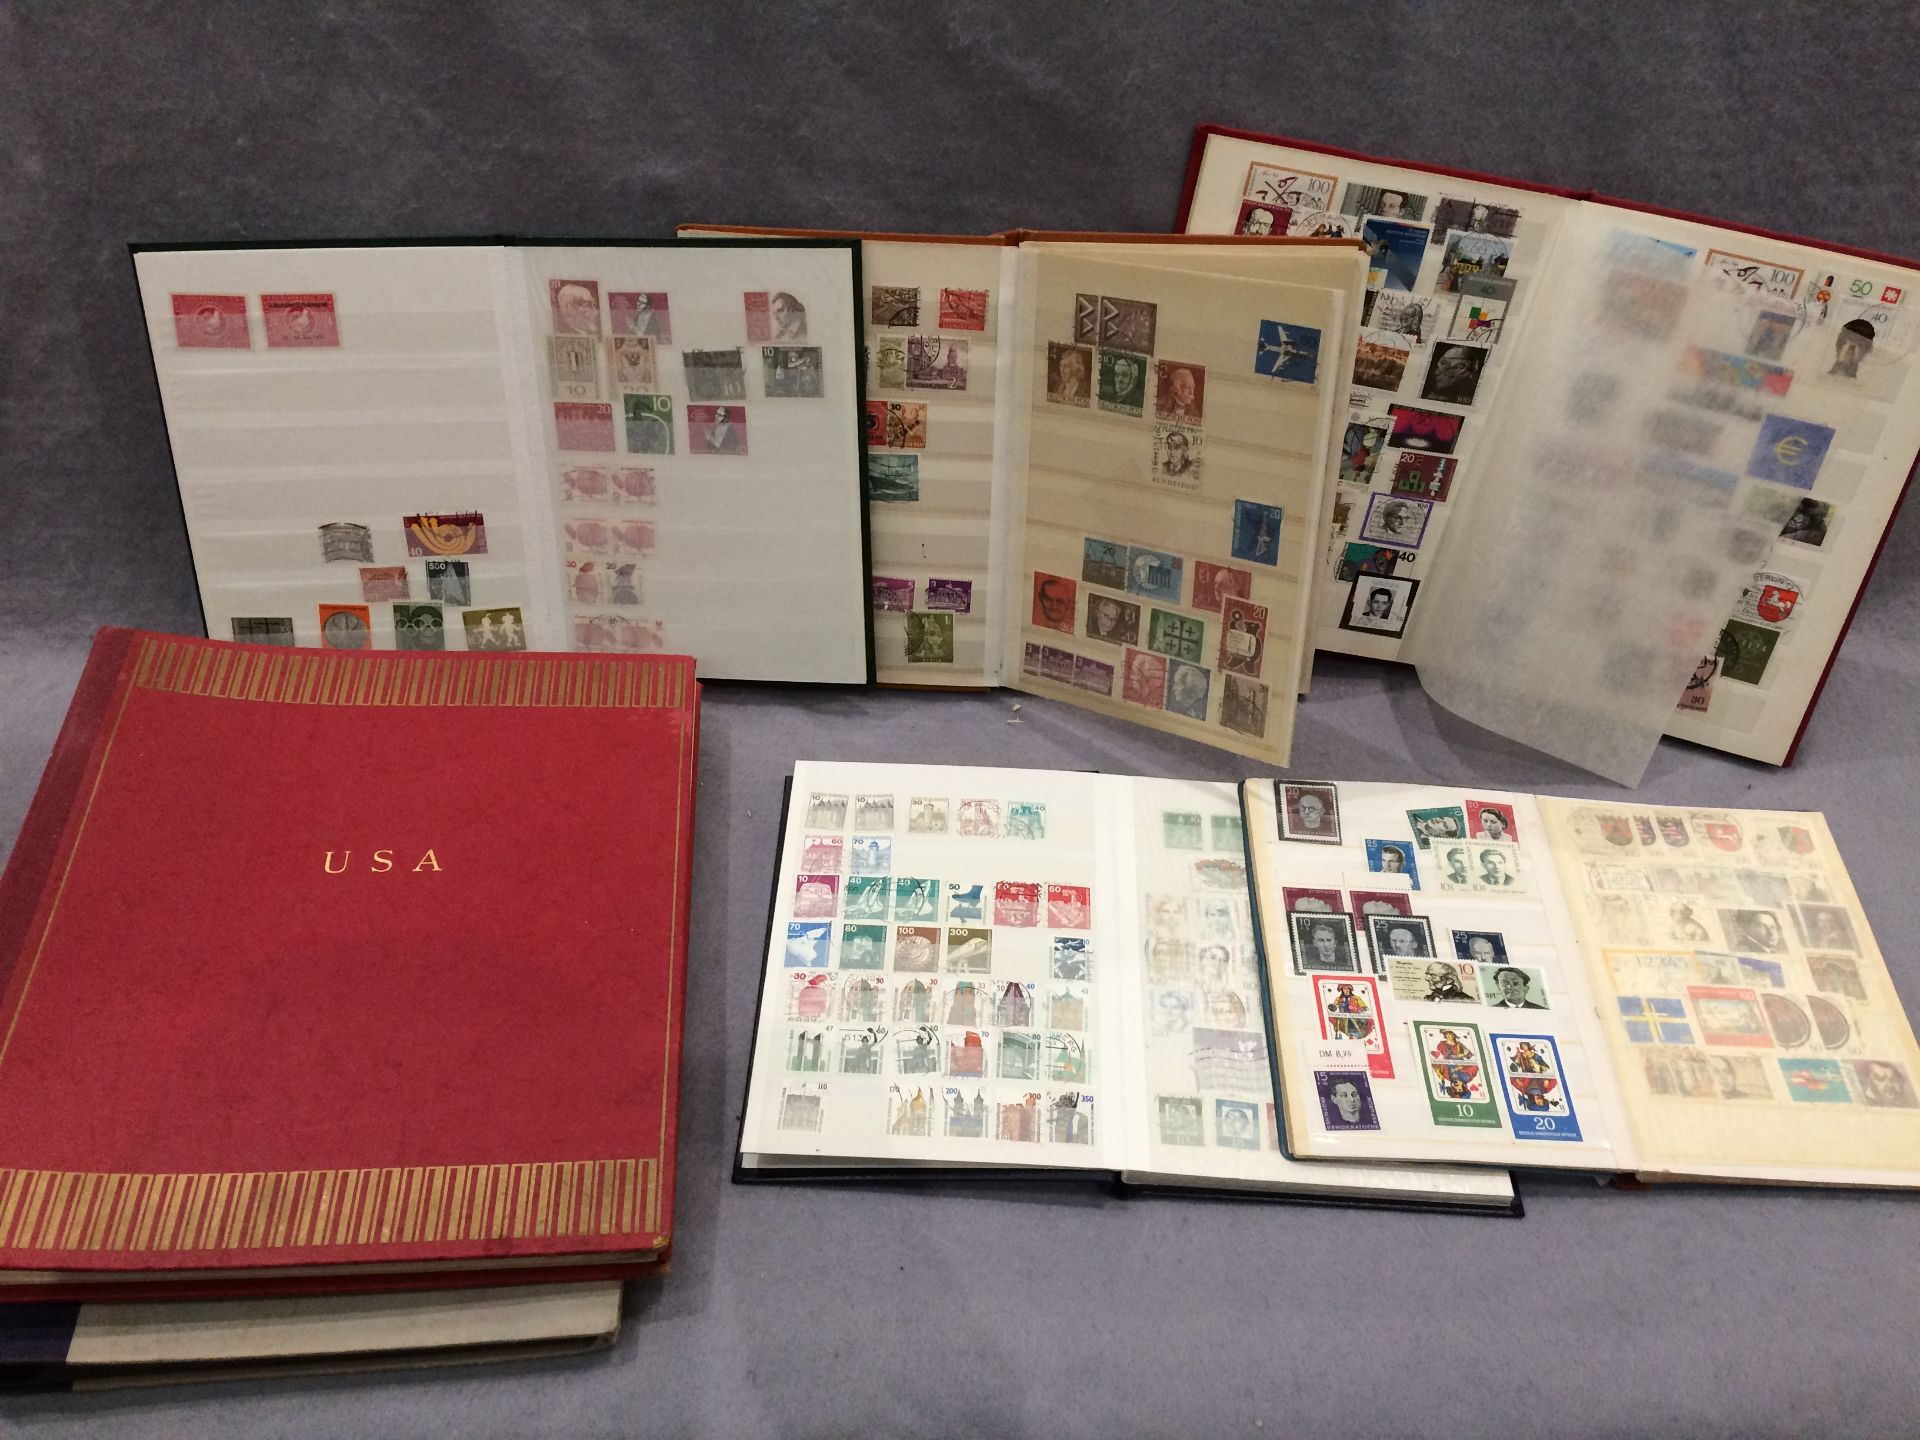 Seven stamp albums - fiver German and two USA